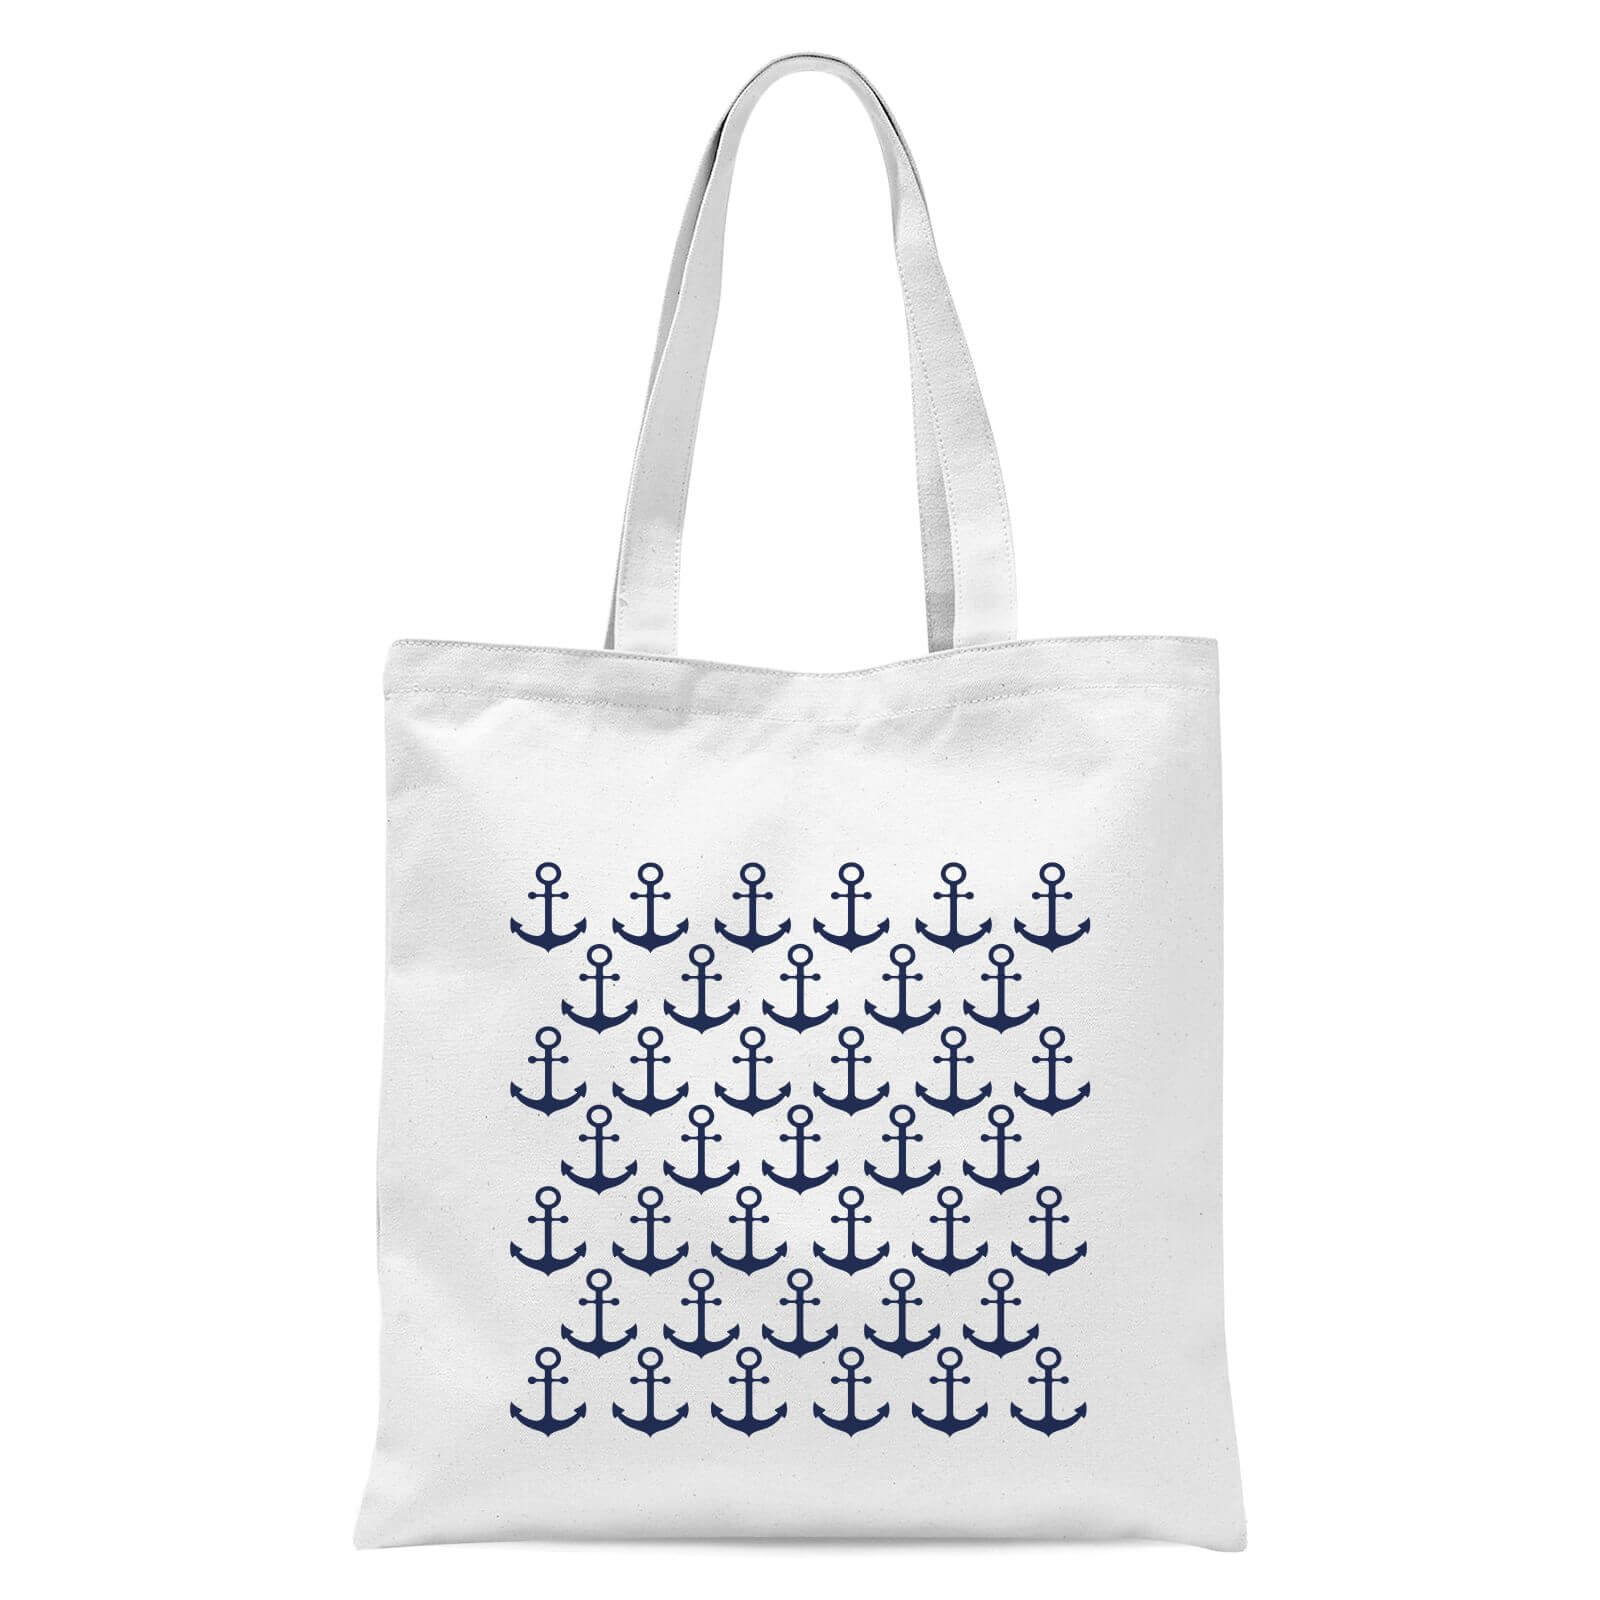 Anchor Repeat Pattern Tote Bag - White